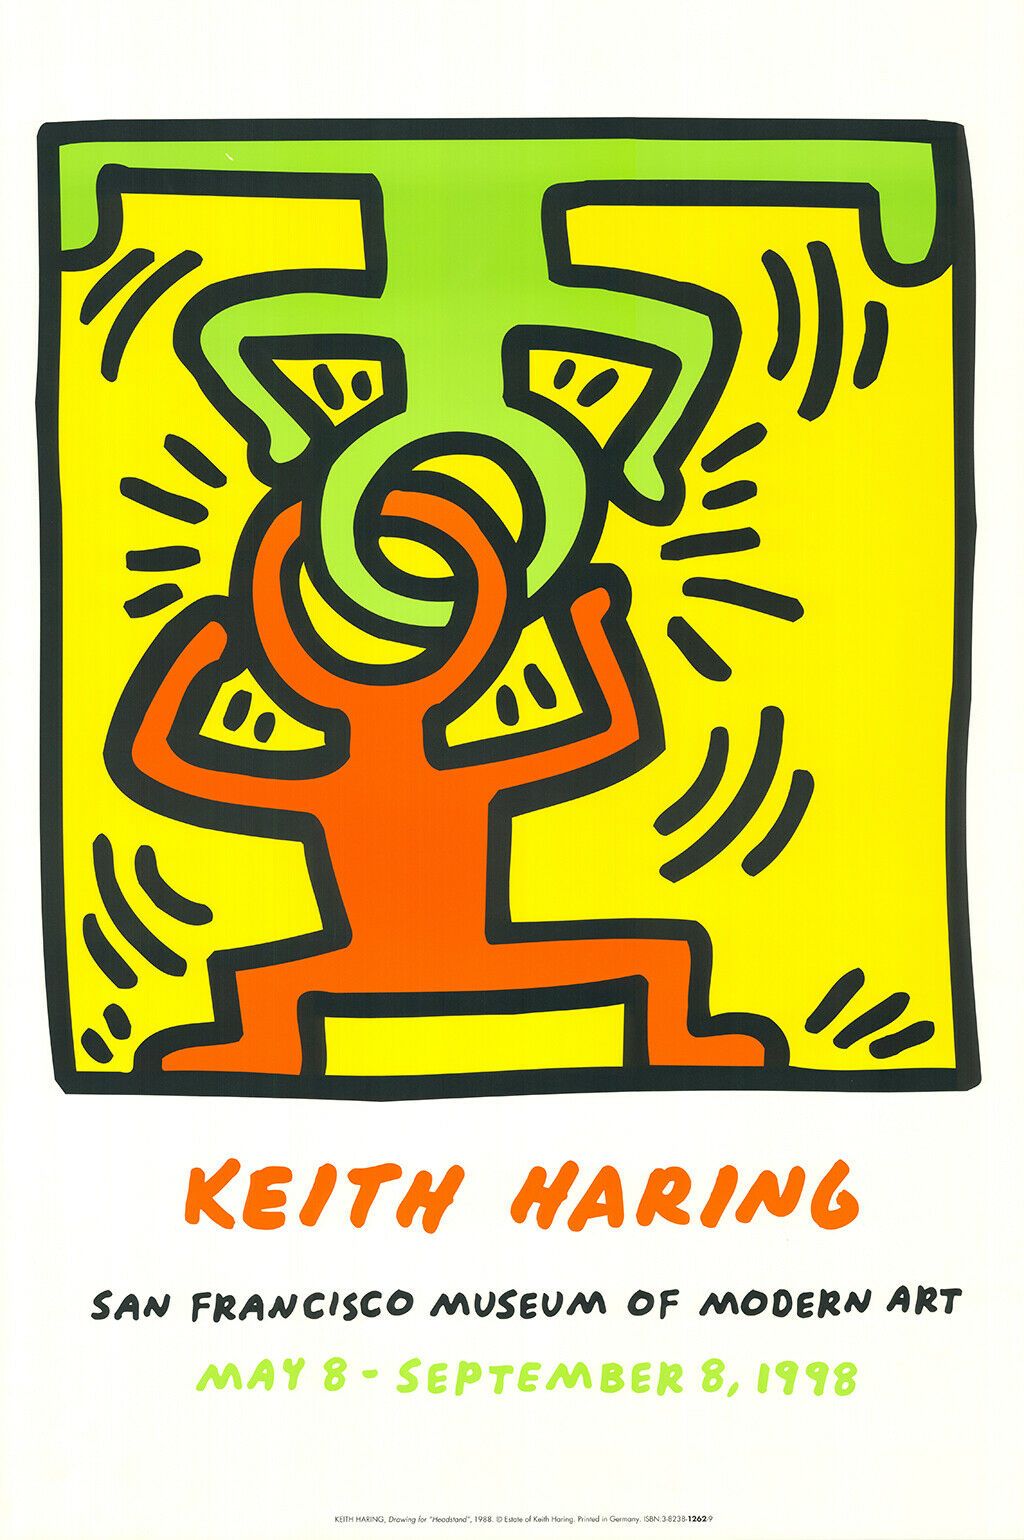 KEITH HARING Keith Haring (1958 - 1990) Offset printing on thick paper, after a &hellip;